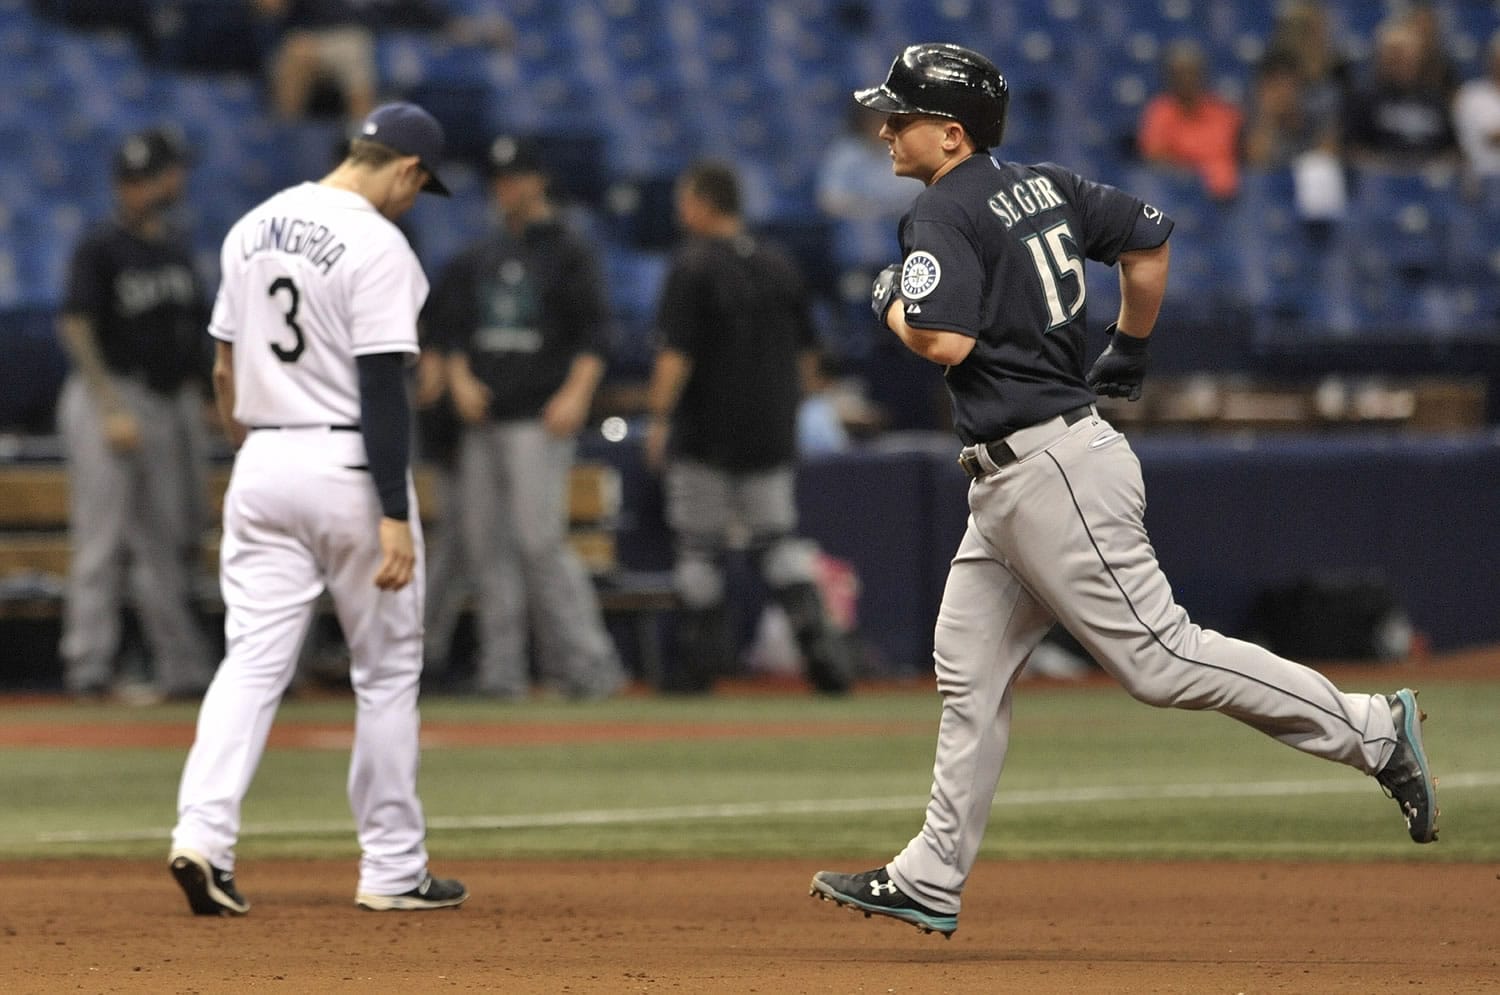 Tampa Bay Rays' Evan Longoria walks back to his position as Seattle Mariners' Kyle Seager circles the bases after hitting a grand slam off Tampa Bay reliever Jake McGee during the eighth inning of a baseball game Tuesday, May 26, 2015, in St. Petersburg, Fla.